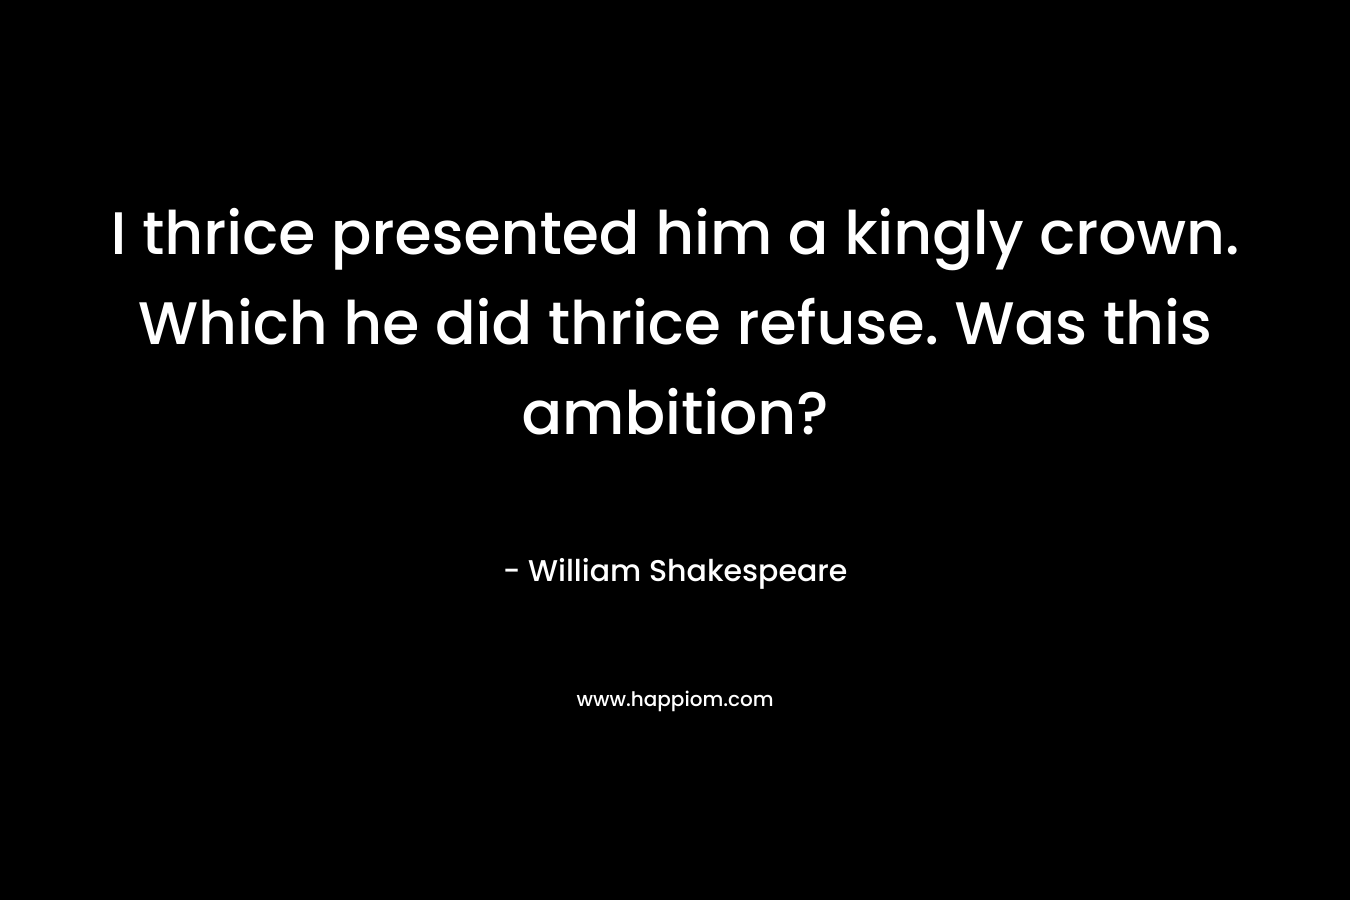 I thrice presented him a kingly crown. Which he did thrice refuse. Was this ambition? – William Shakespeare